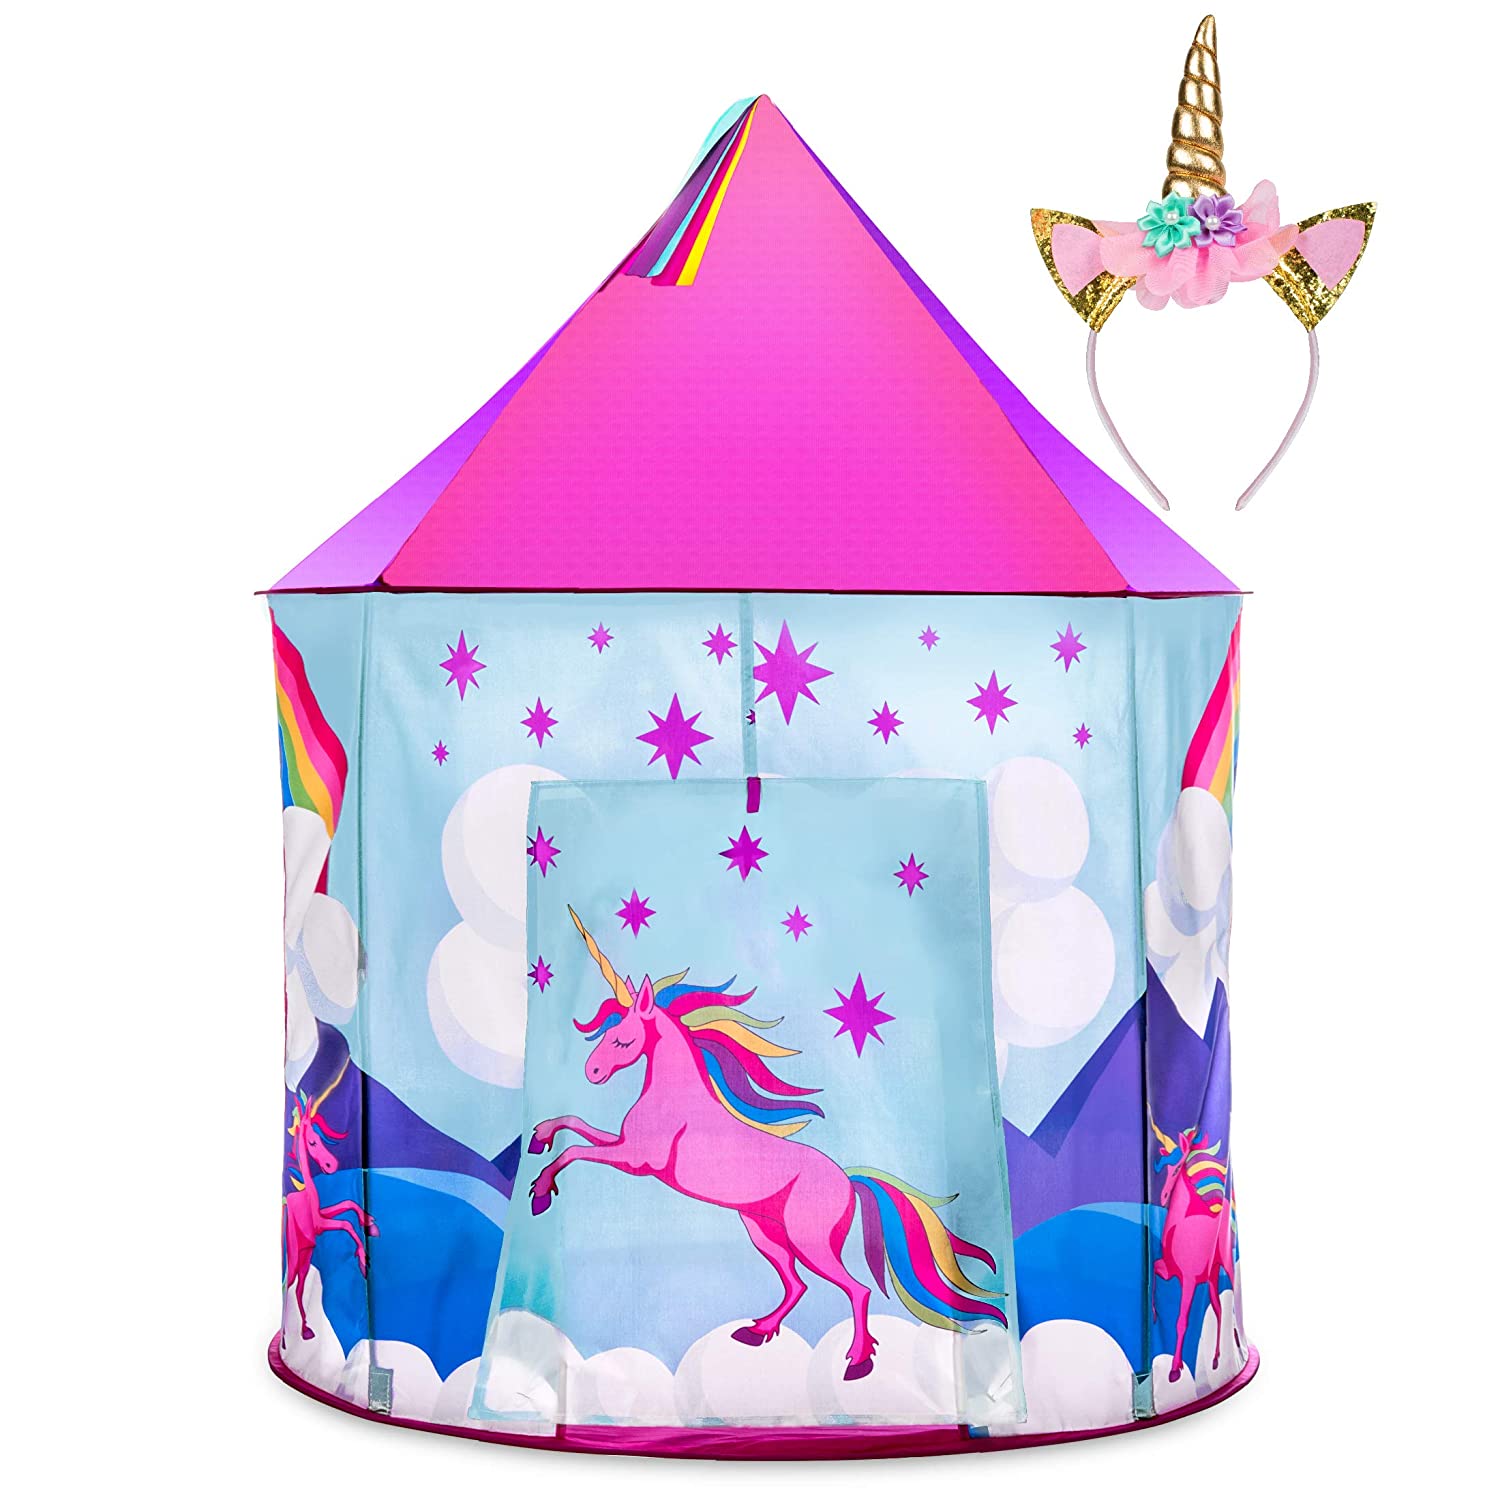 23 Best Unicorn Toys and Gifts for Girls 2022 - Review & Buying Guide 21